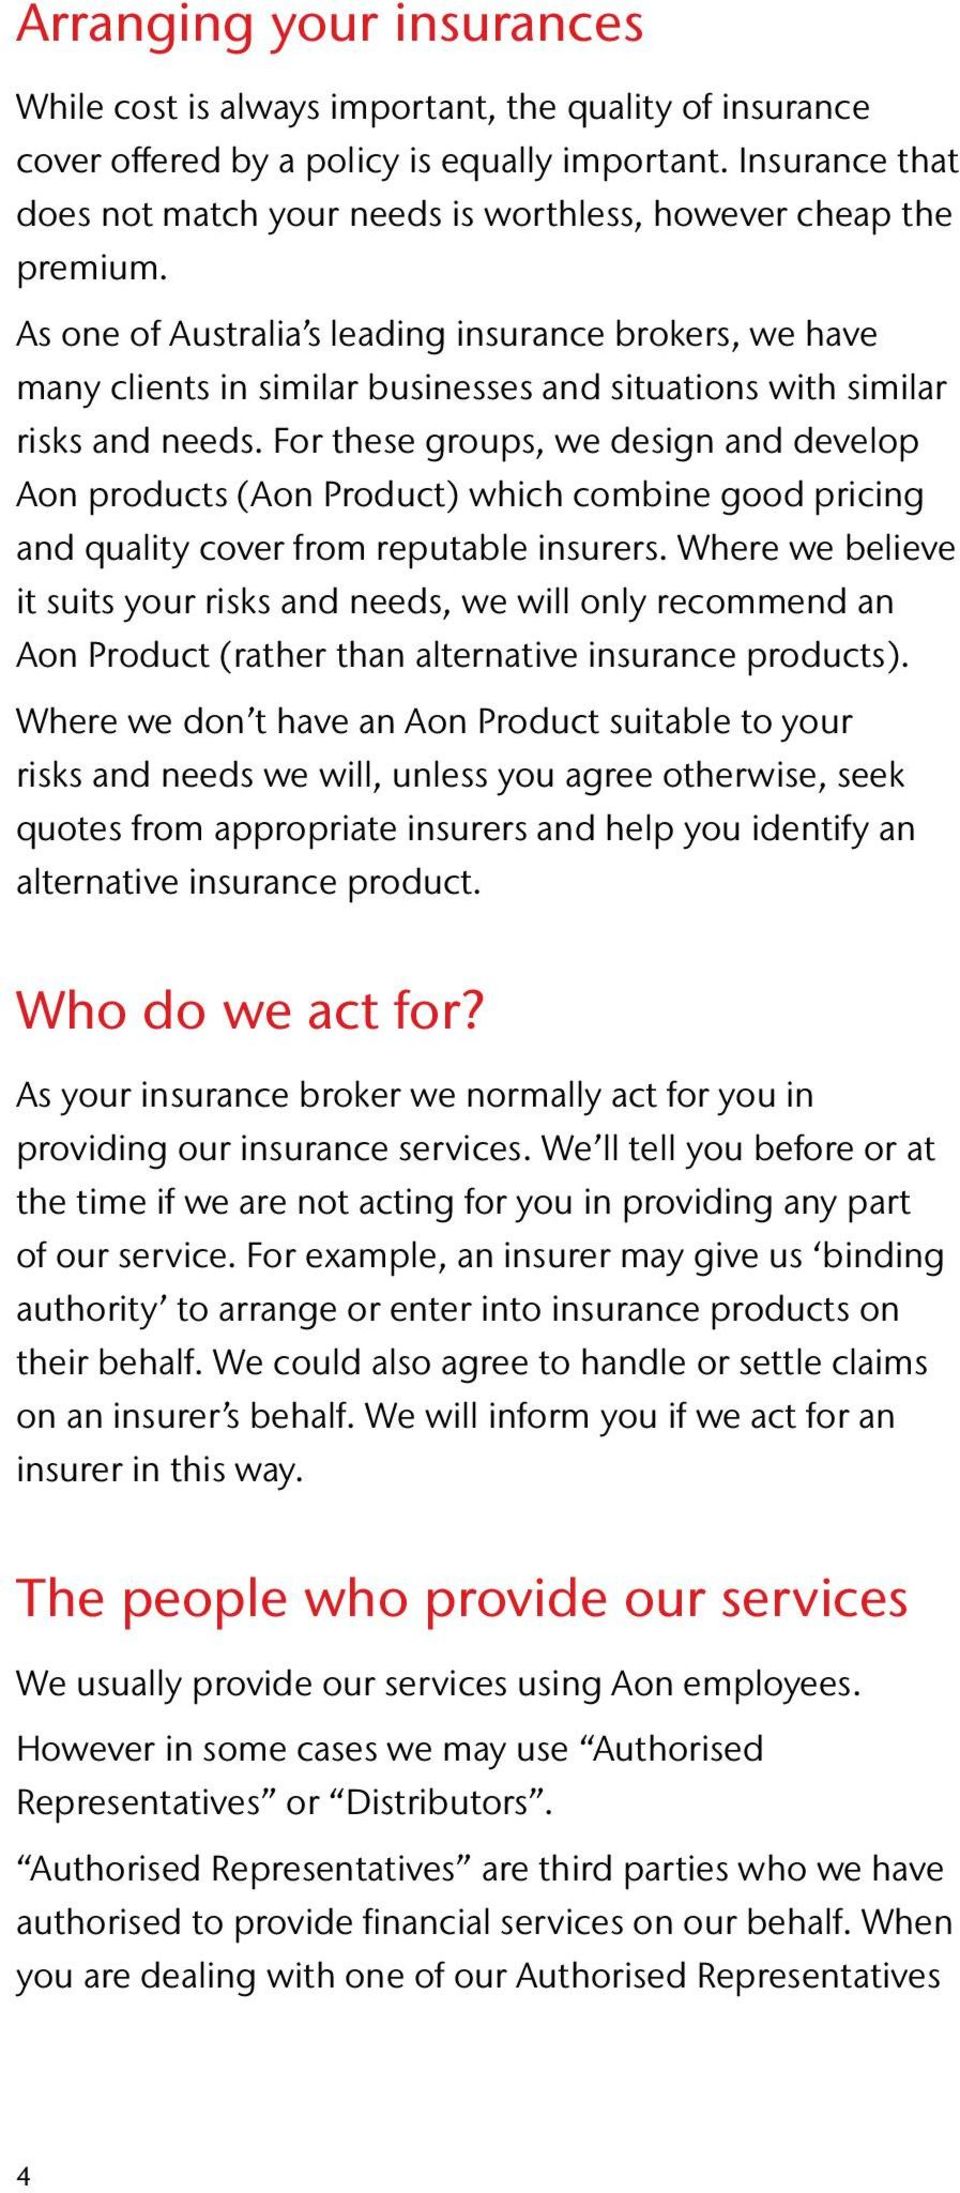 As one of Australia s leading insurance brokers, we have many clients in similar businesses and situations with similar risks and needs.